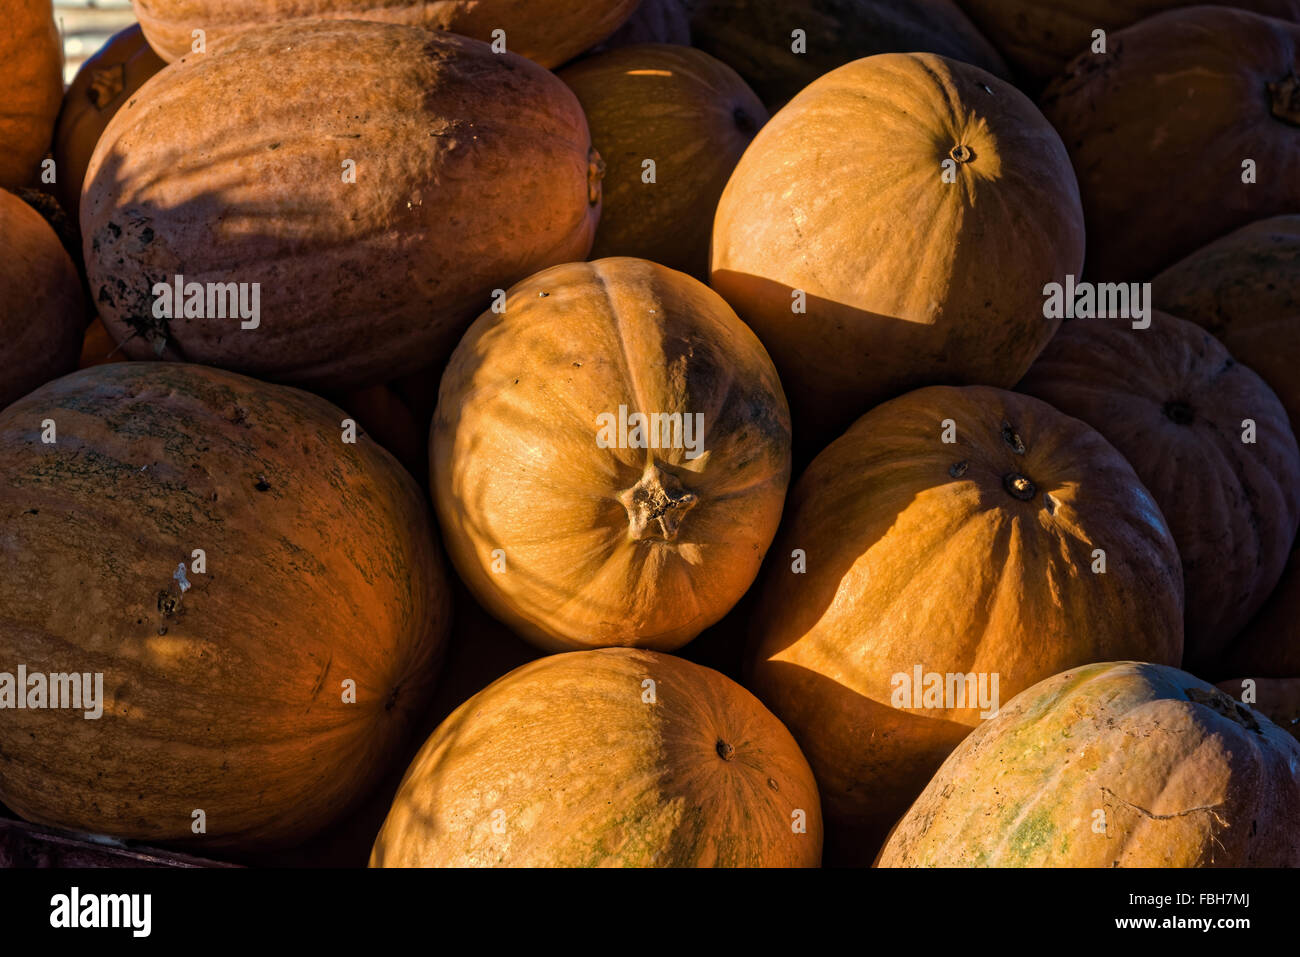 Pumpkins for sale at sunset in Kos island, Greece Stock Photo